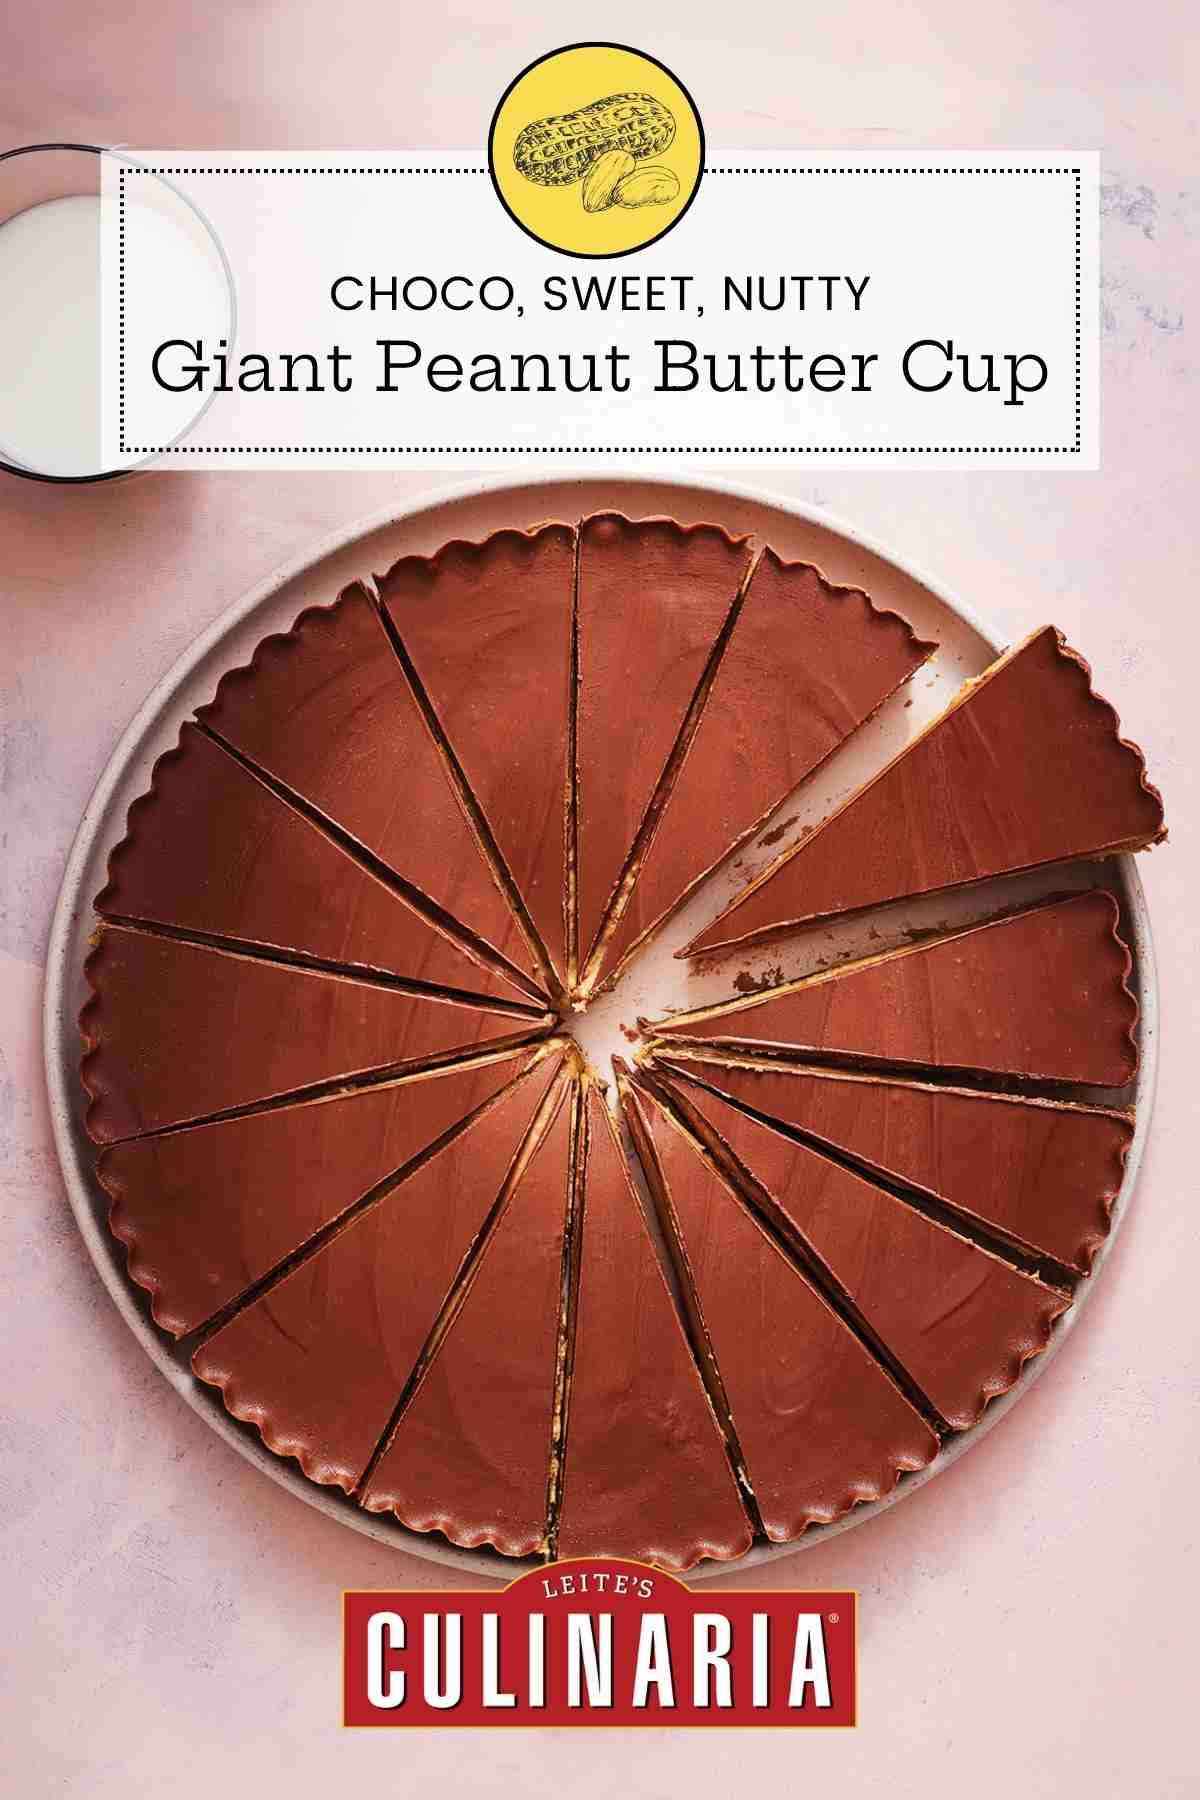 A giant peanut butter cup on a plate, cut into 15 wedges.